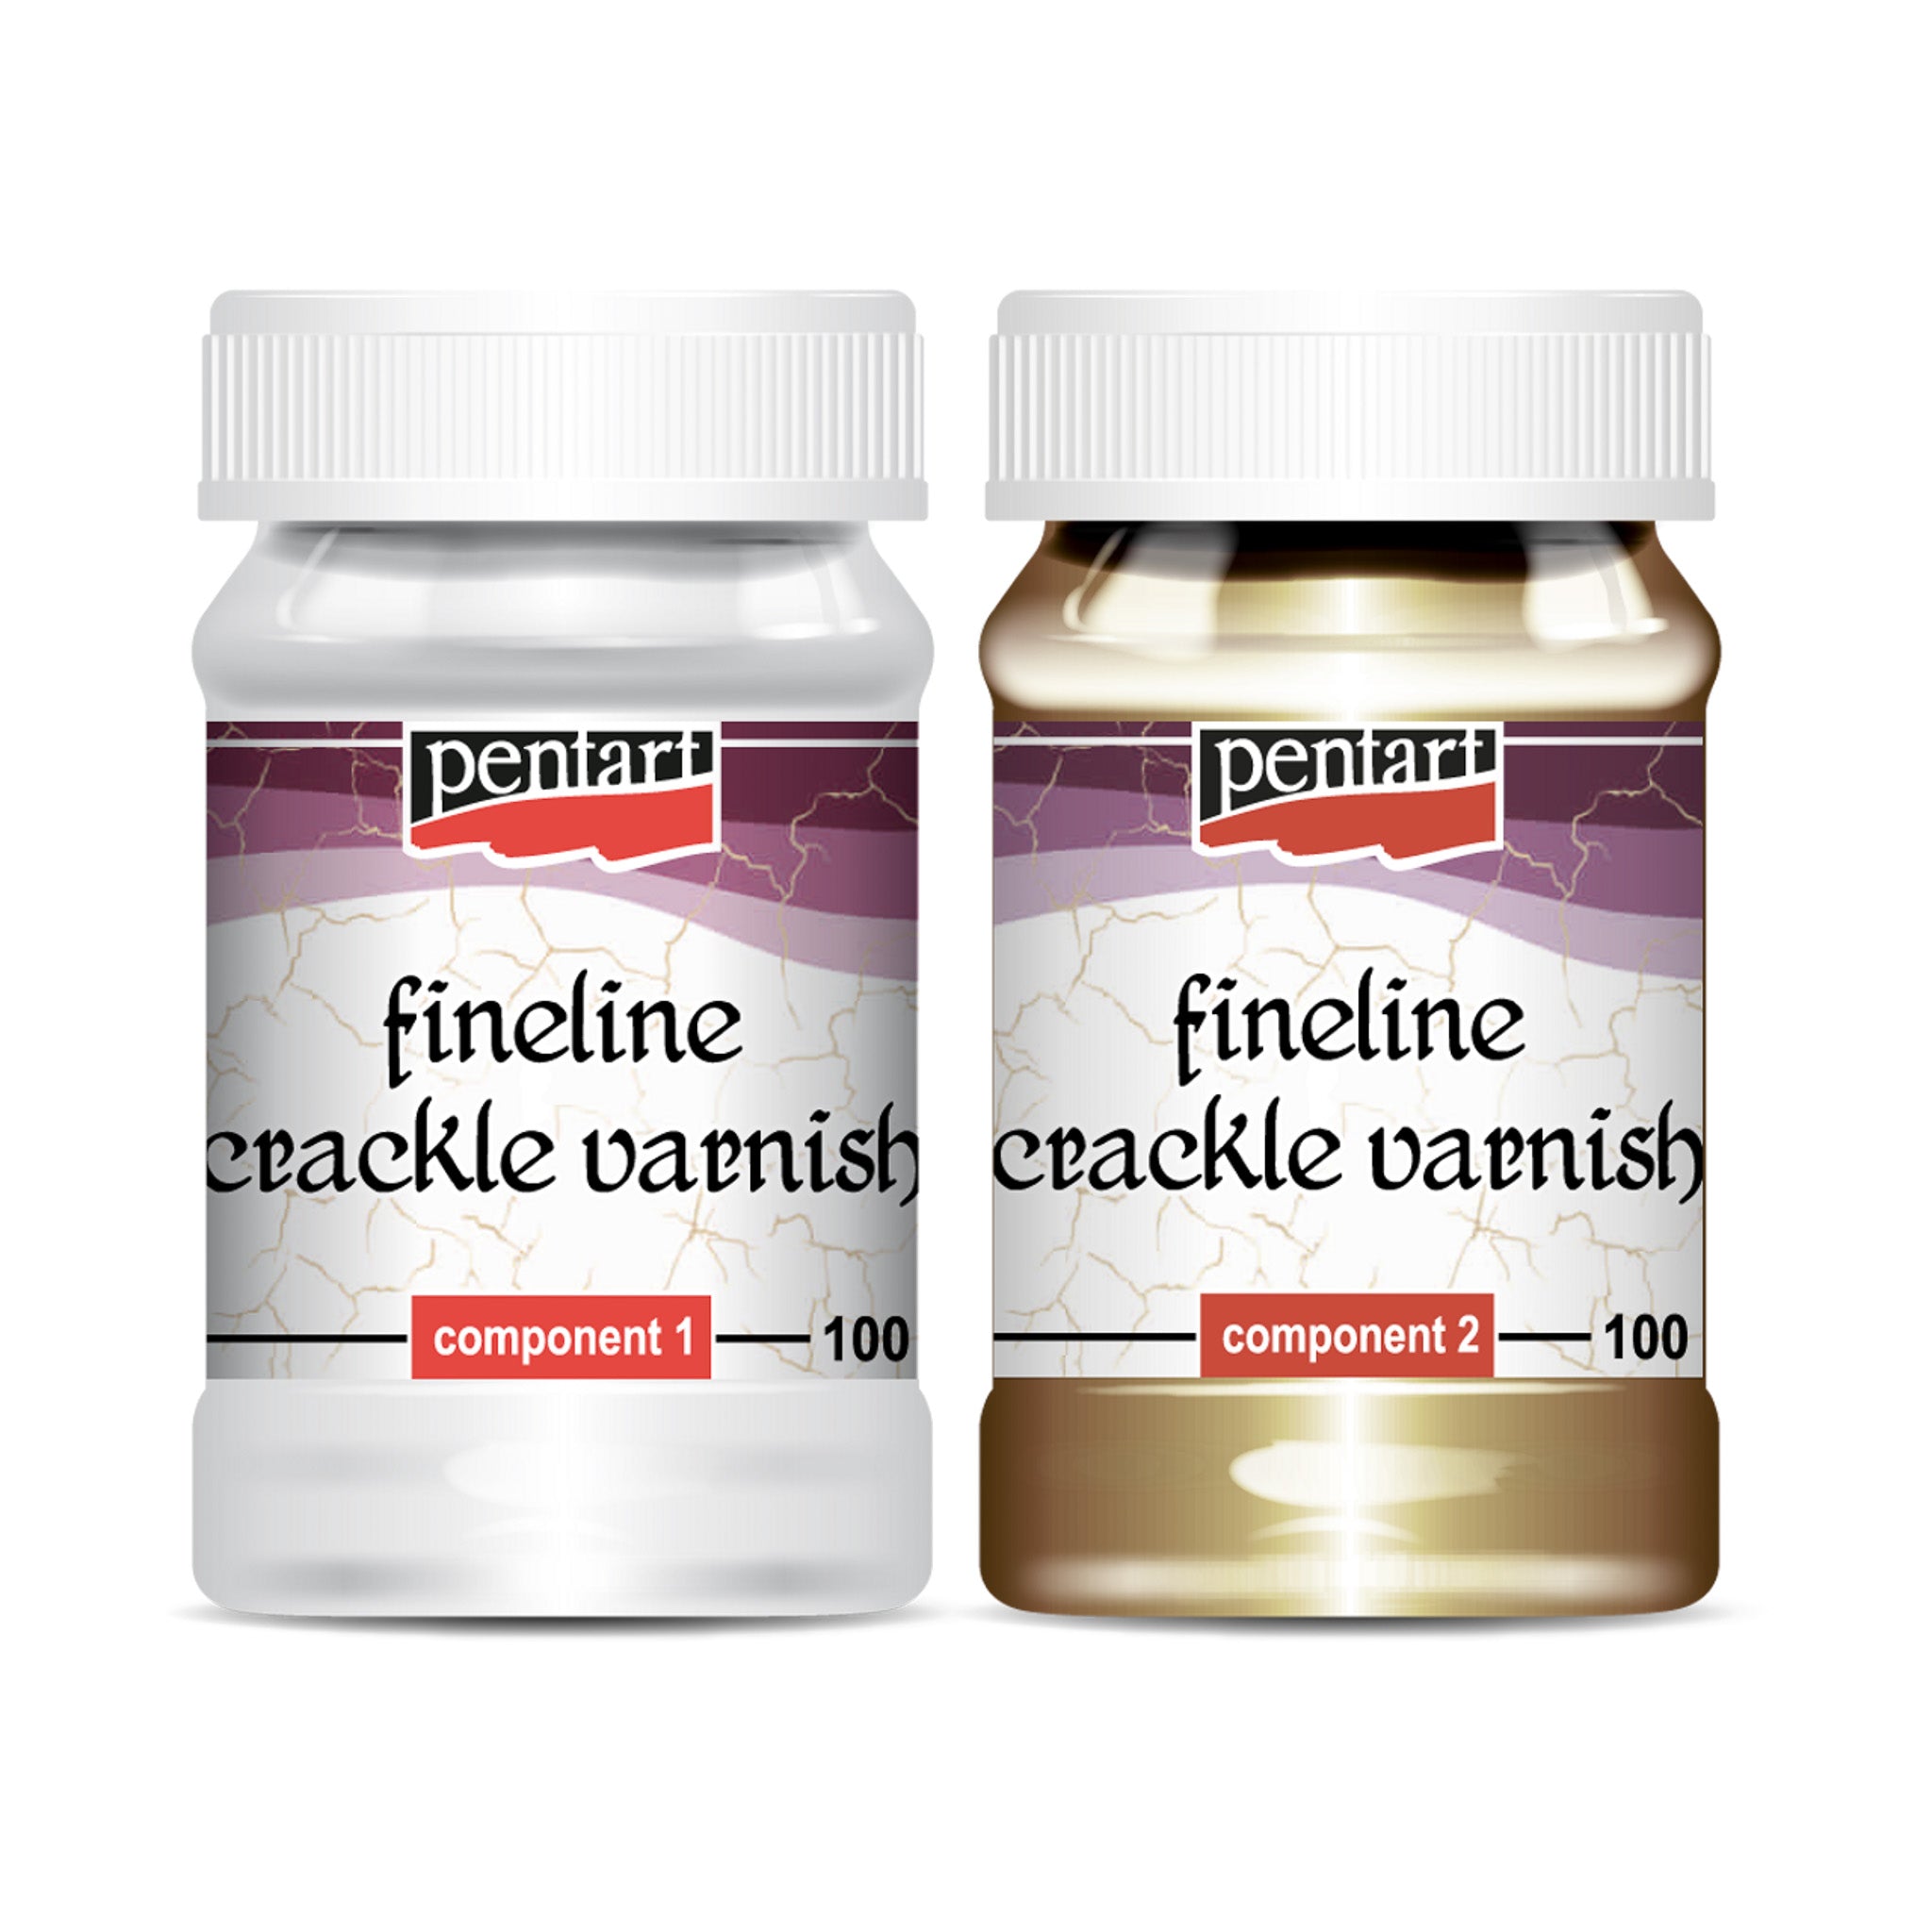 Two 100ml containers of Pentart's Fineline Crackle Varnish are against a white background. The left container is Component 1 and the right container is Component 2.